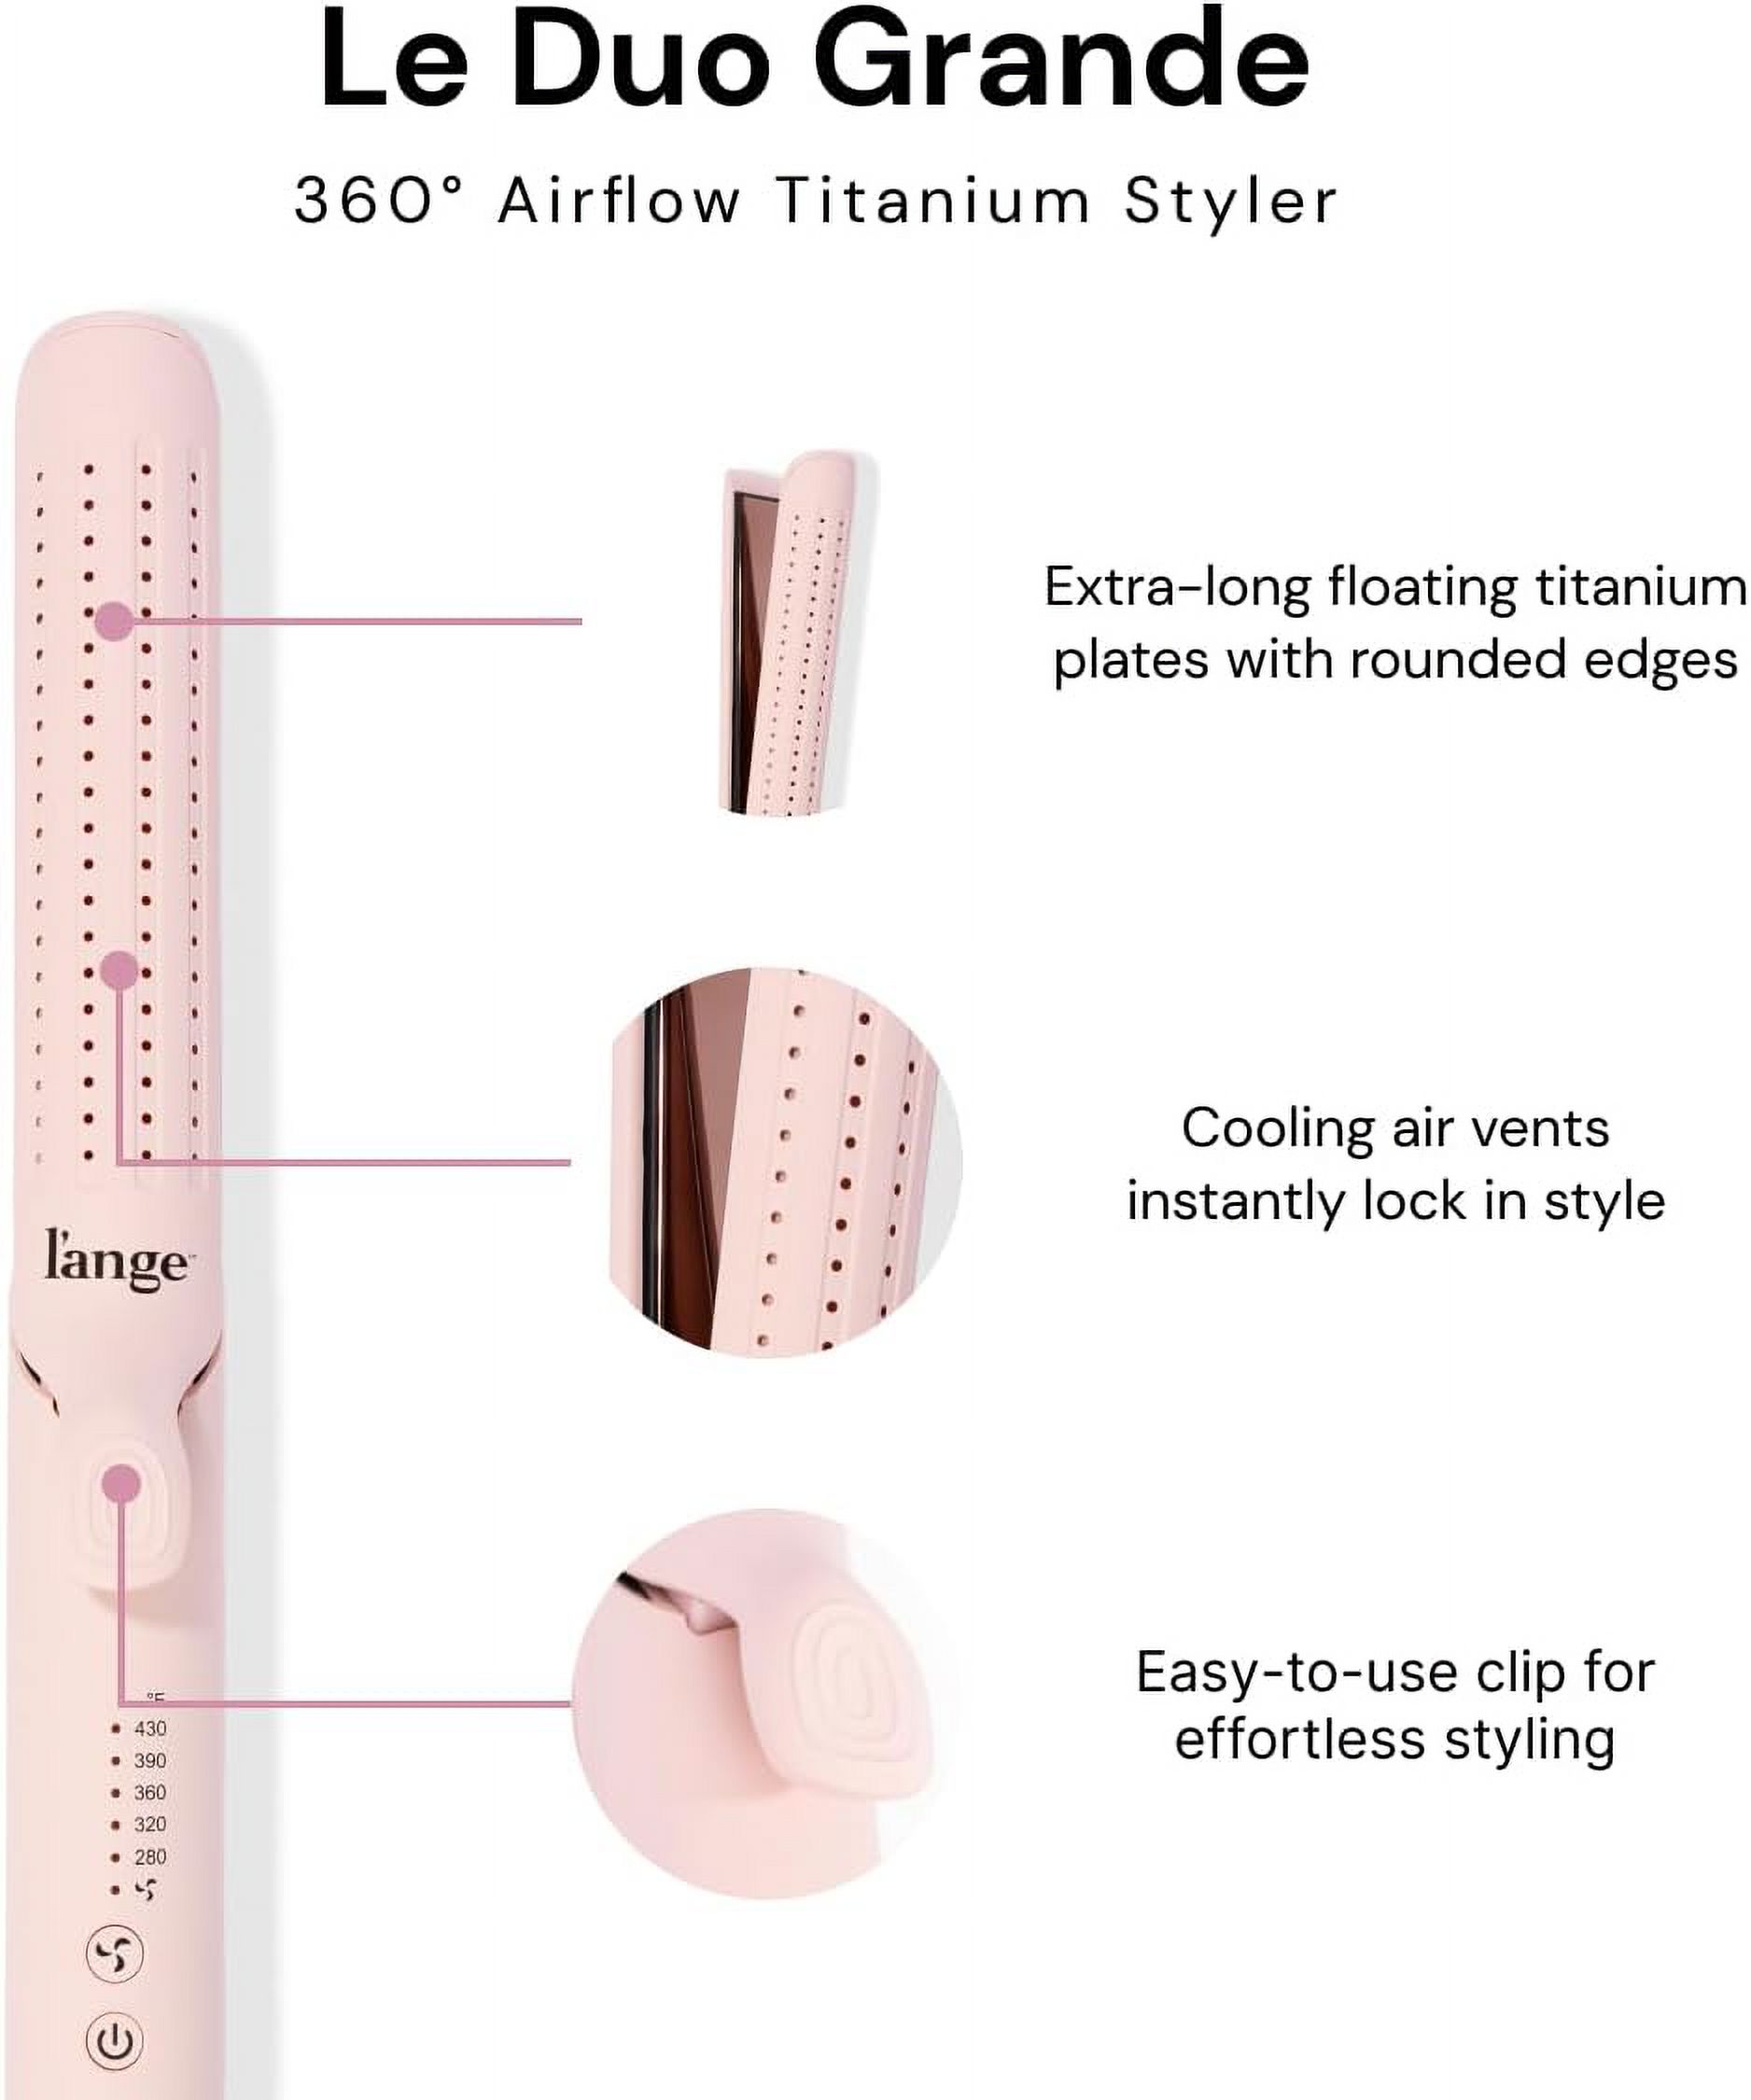 L'ange Hair Le Duo Grande 360° Airflow Styler | 2-in-1 Curling Wand & Titanium Flat Iron Hair Straightener - image 2 of 9